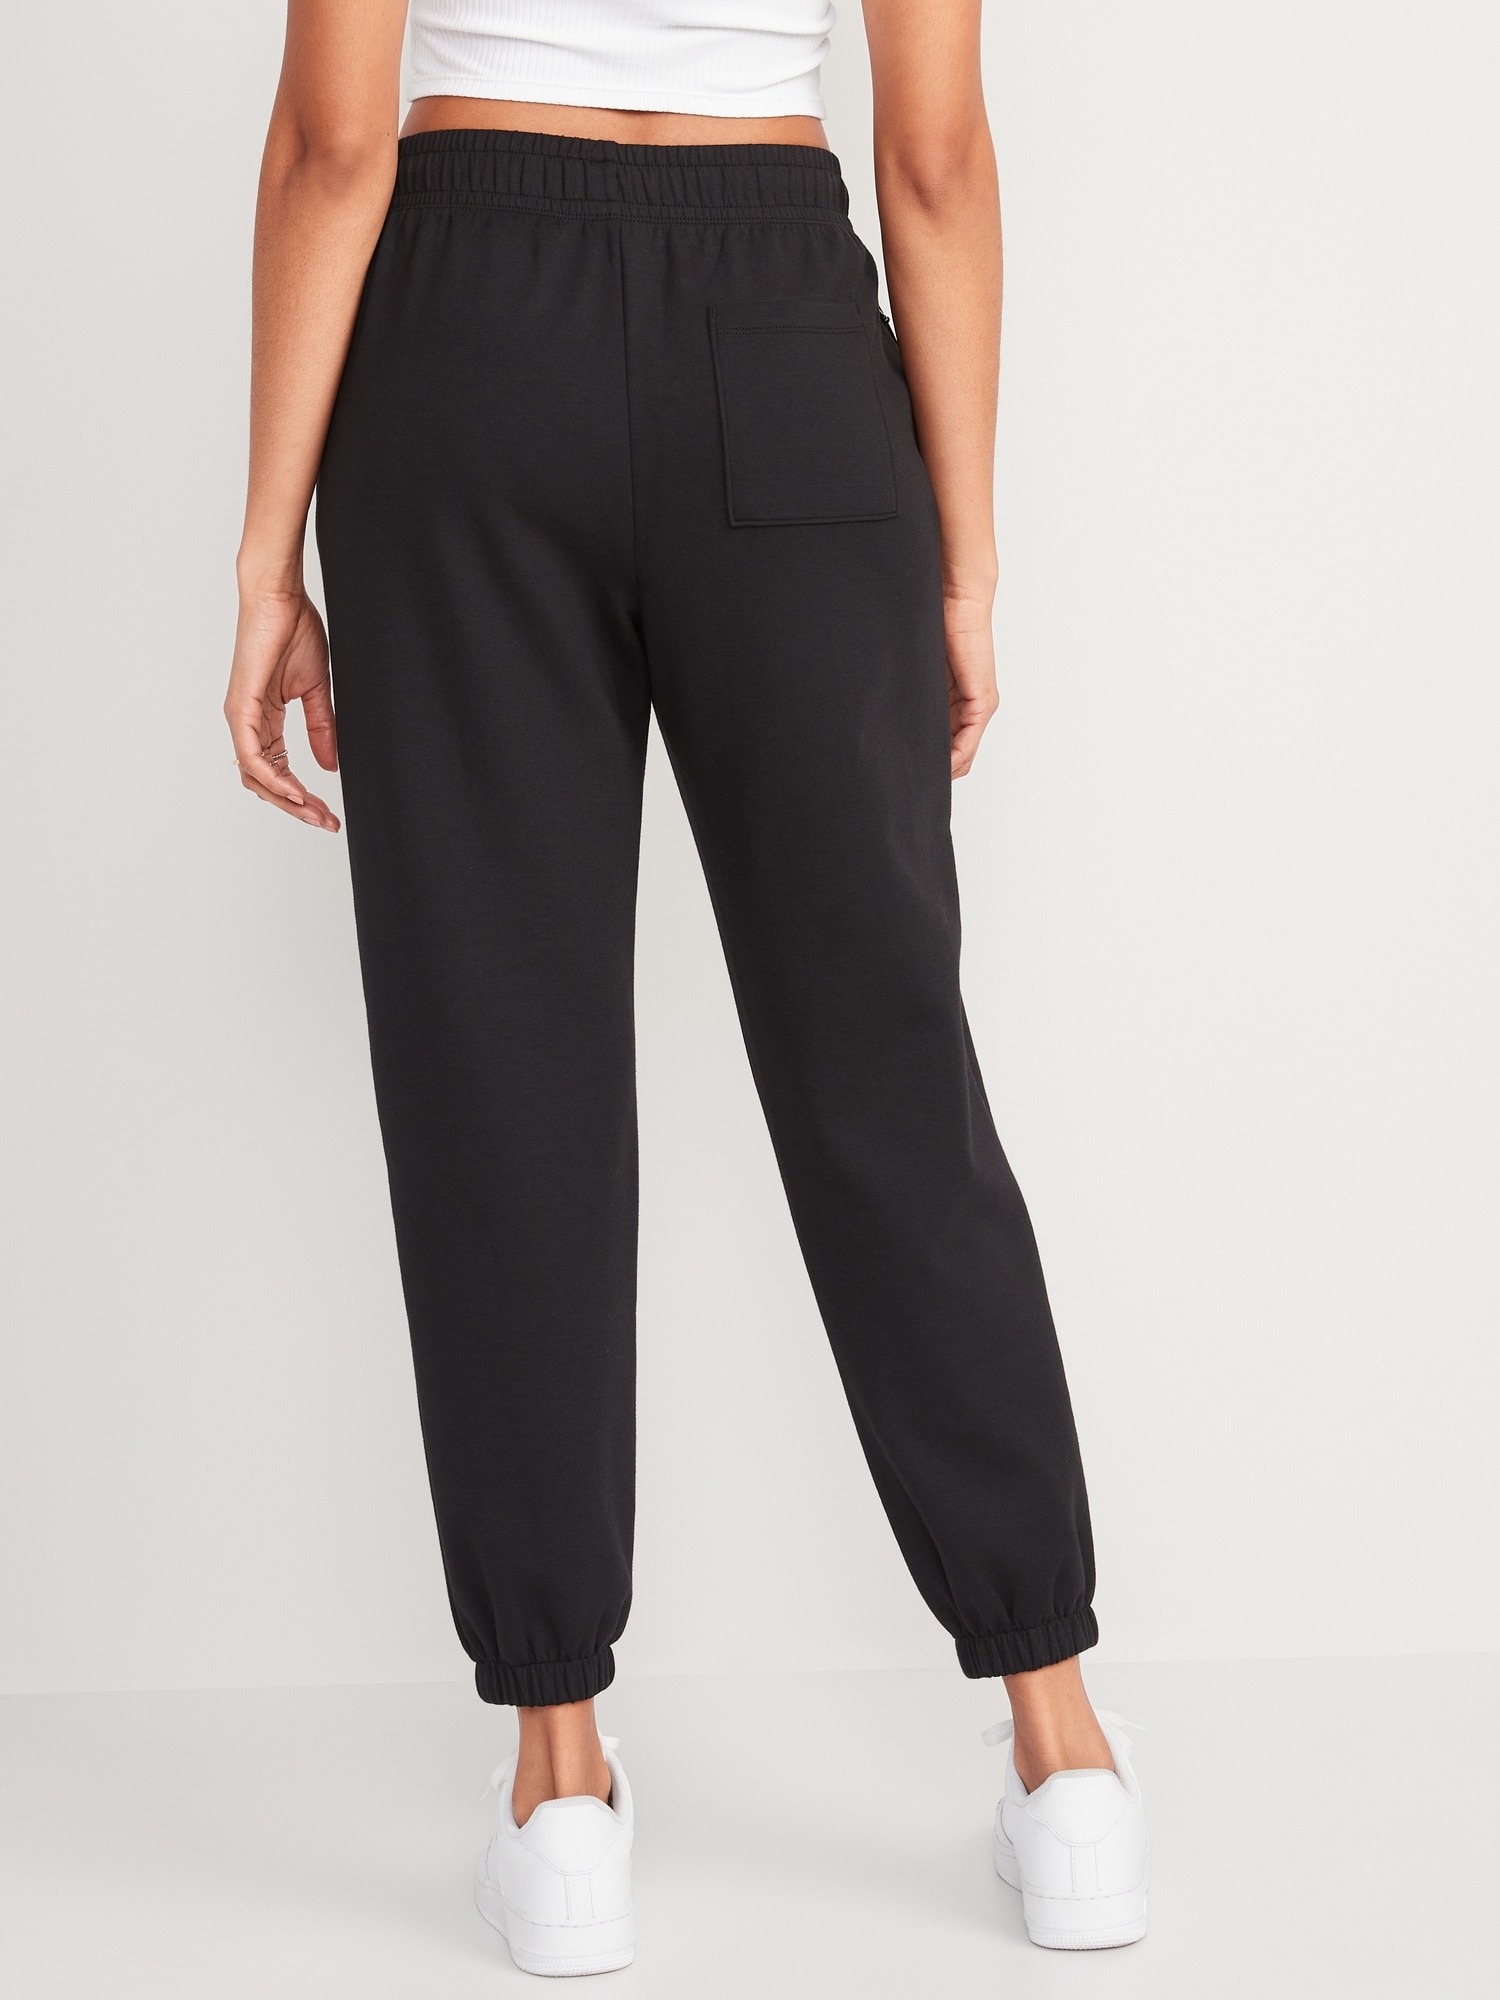 High-Waisted Dynamic Fleece Pintucked Sweatpants for Women | Old Navy